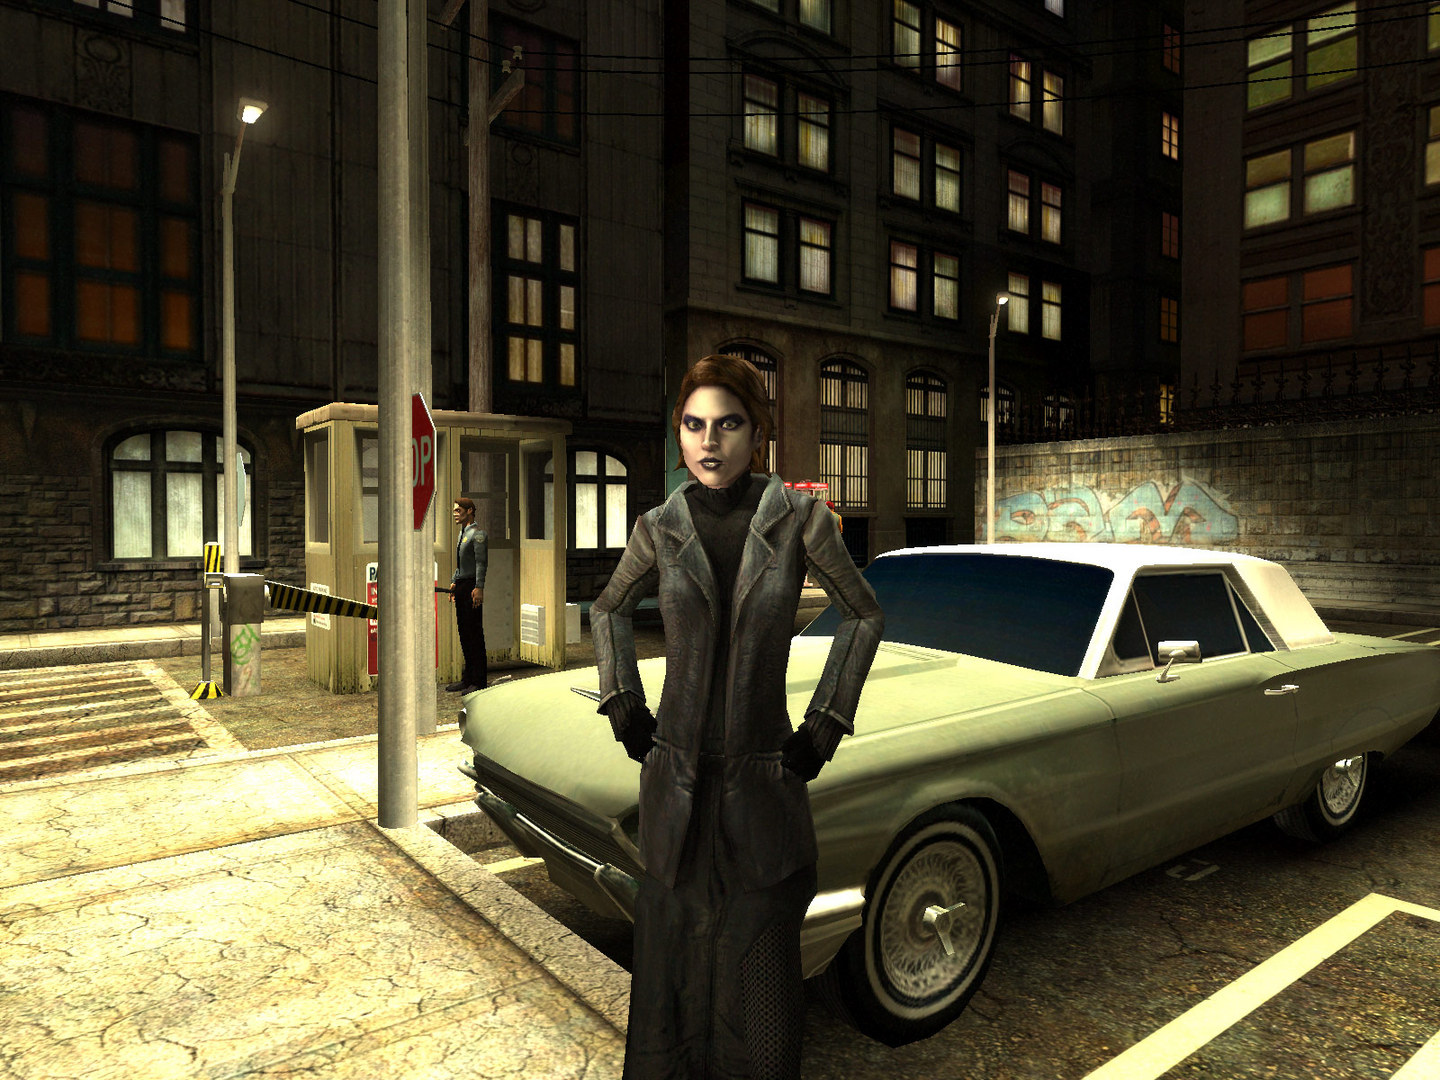 The Nocturnal Rambler: (GGYNP) Vampire: The Masquerade - Bloodlines